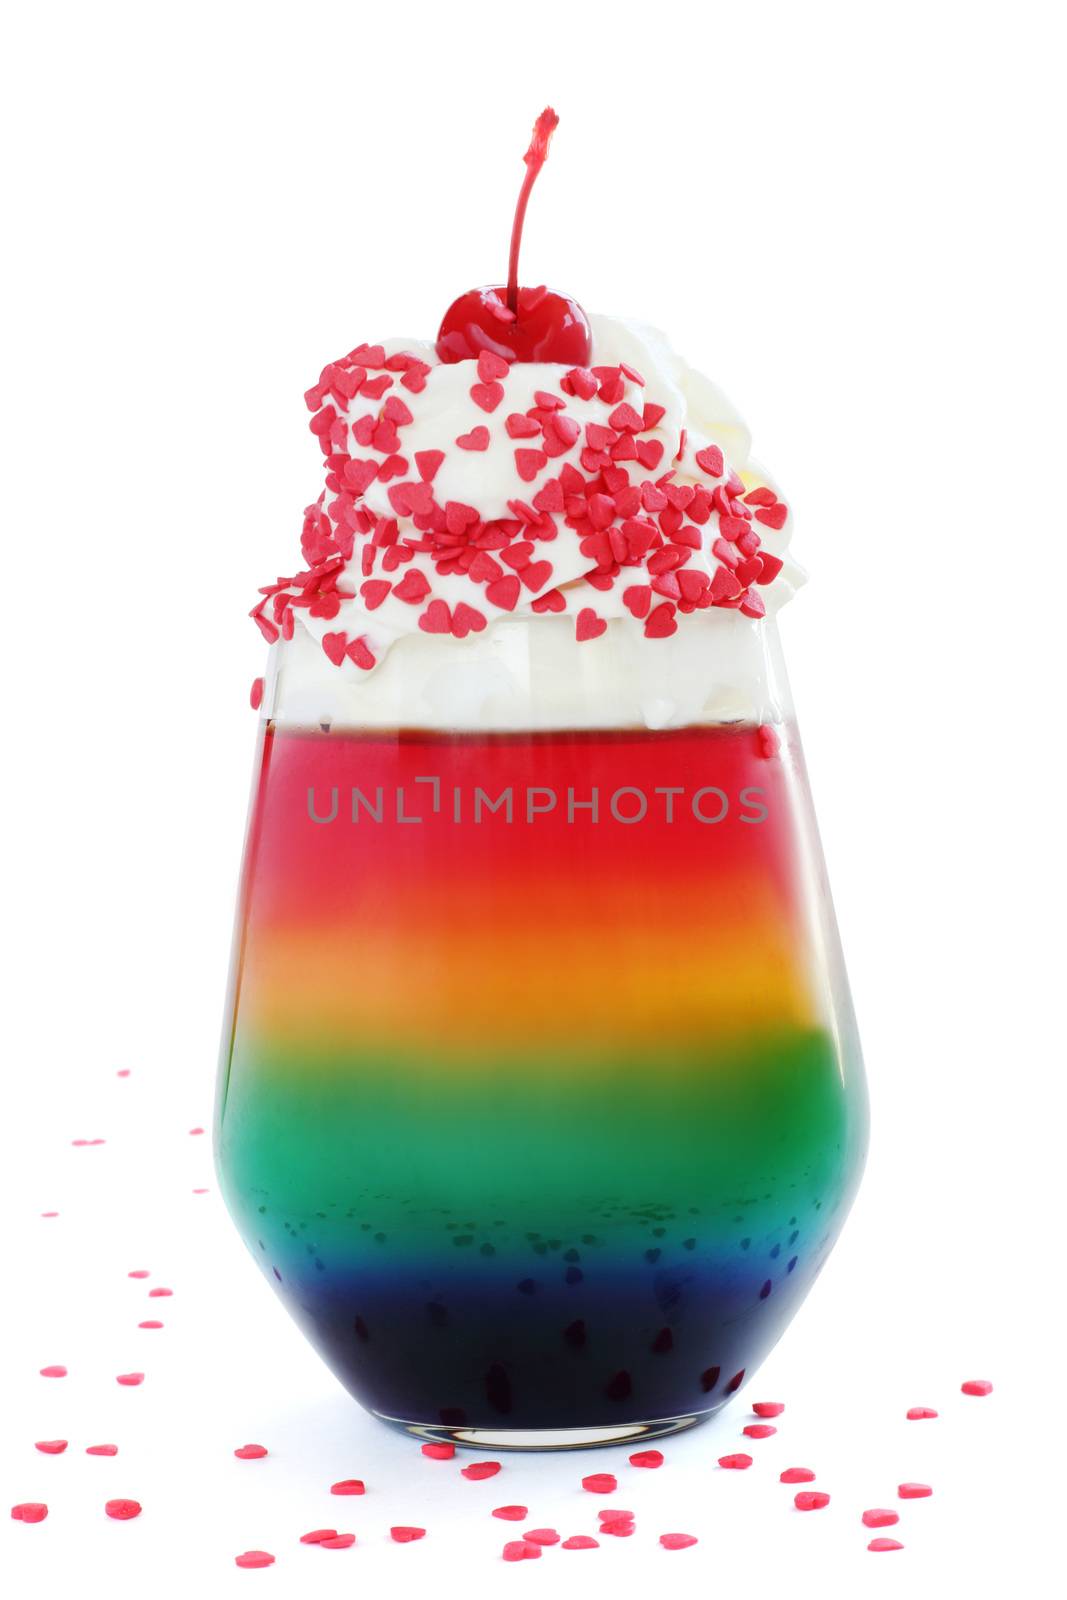 Rainbow colored jello dessert in glass with whipped cream, red candied cherry and heart shape confectionery on top isolated on white background, Valentines day